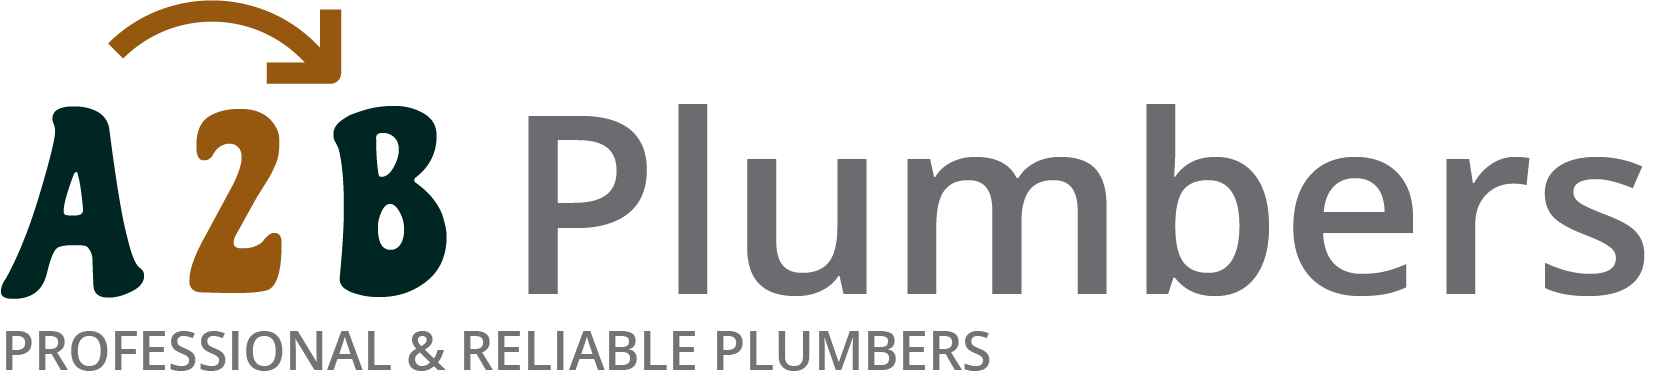 If you need a boiler installed, a radiator repaired or a leaking tap fixed, call us now - we provide services for properties in Huyton and the local area.